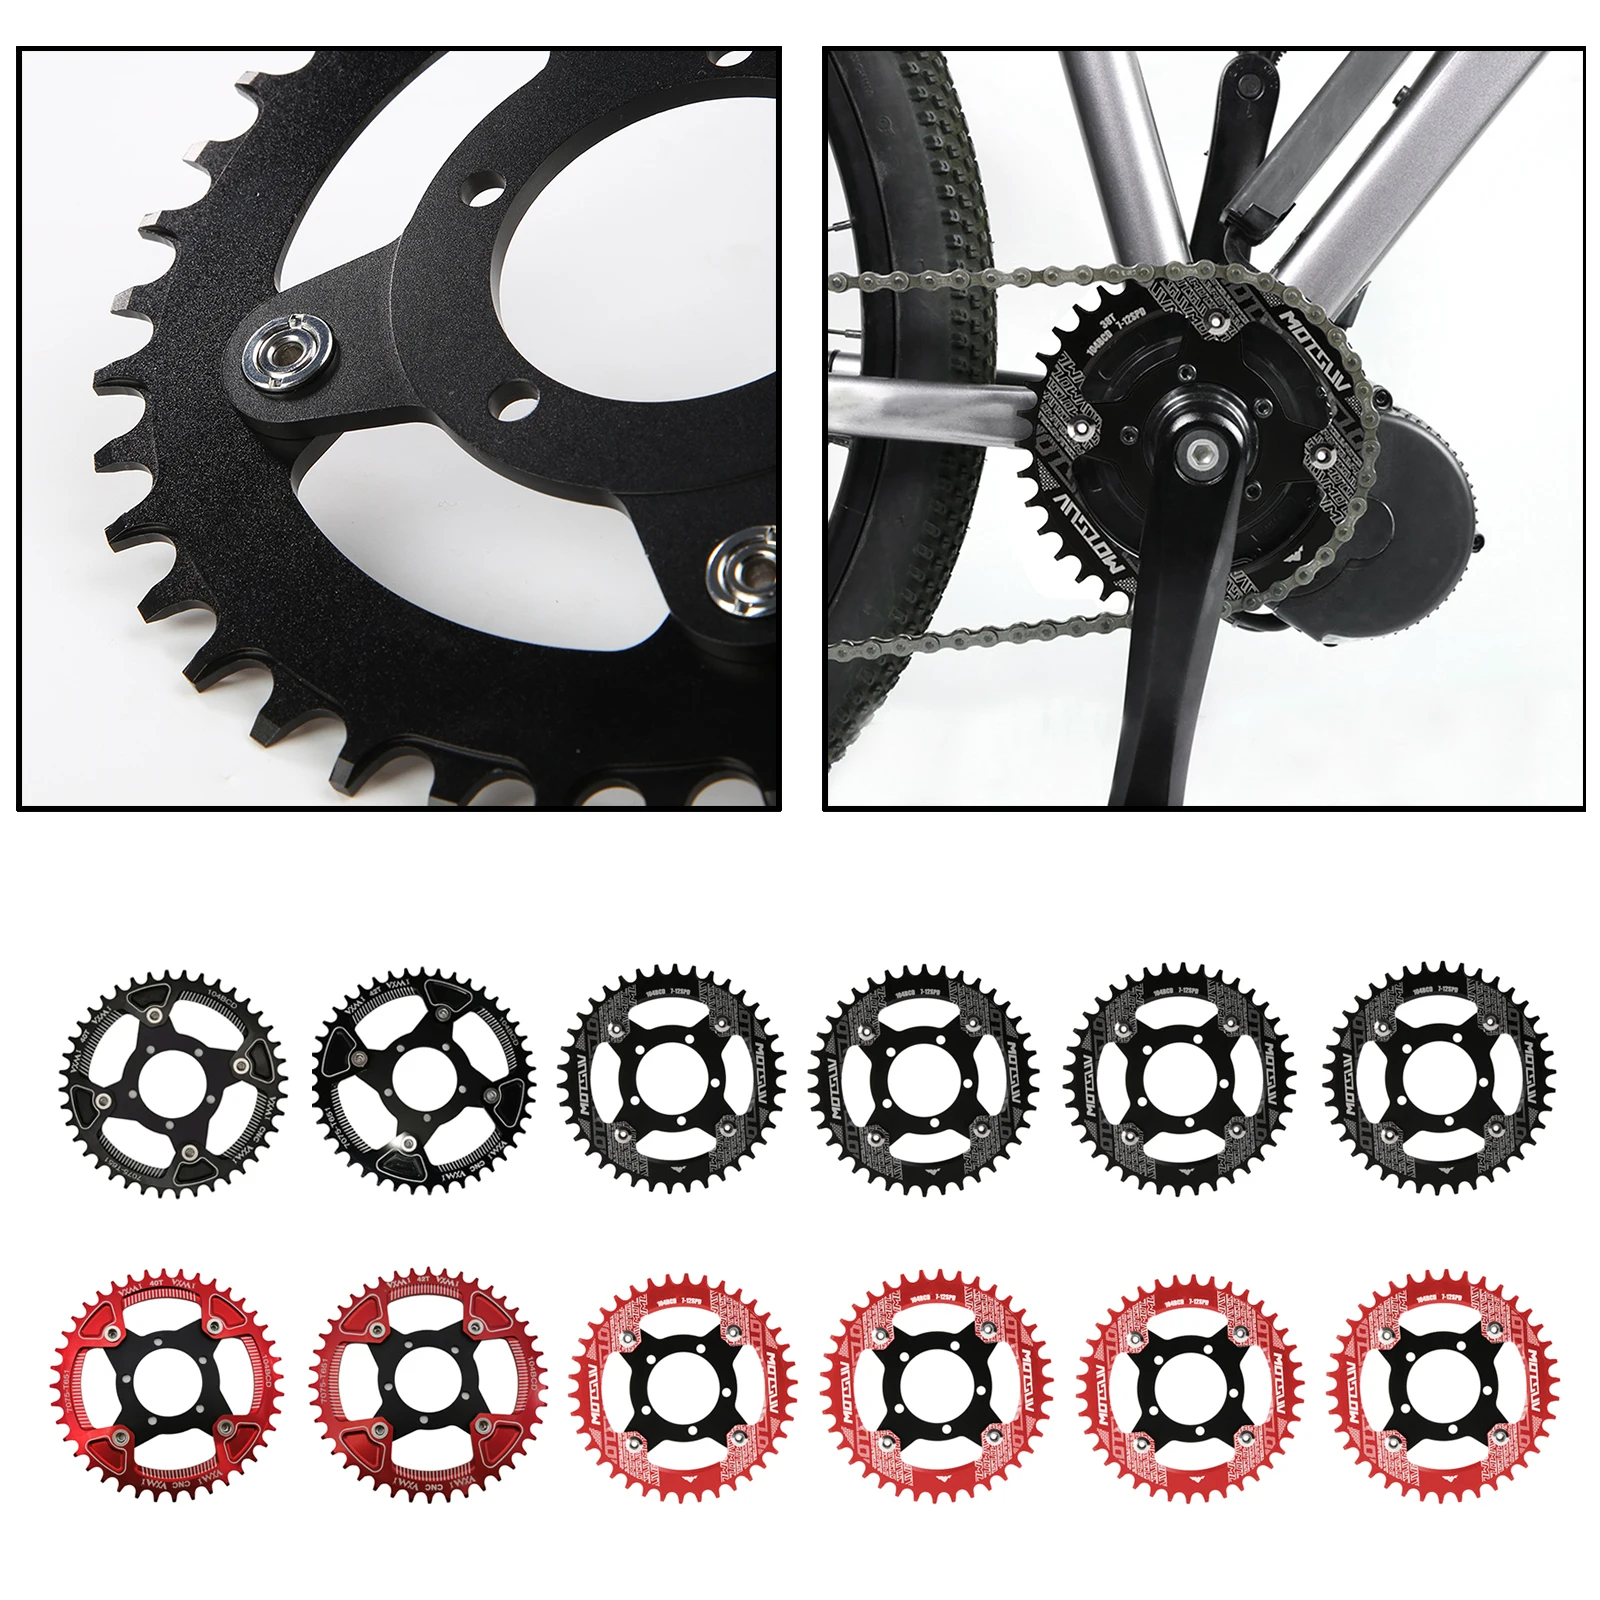 E-bike 104BCD 32/34/36/38/40/42T Chainring Adapter For Bafang Mid Drive Motor Electric Bike Aluminium Alloy Chainrings